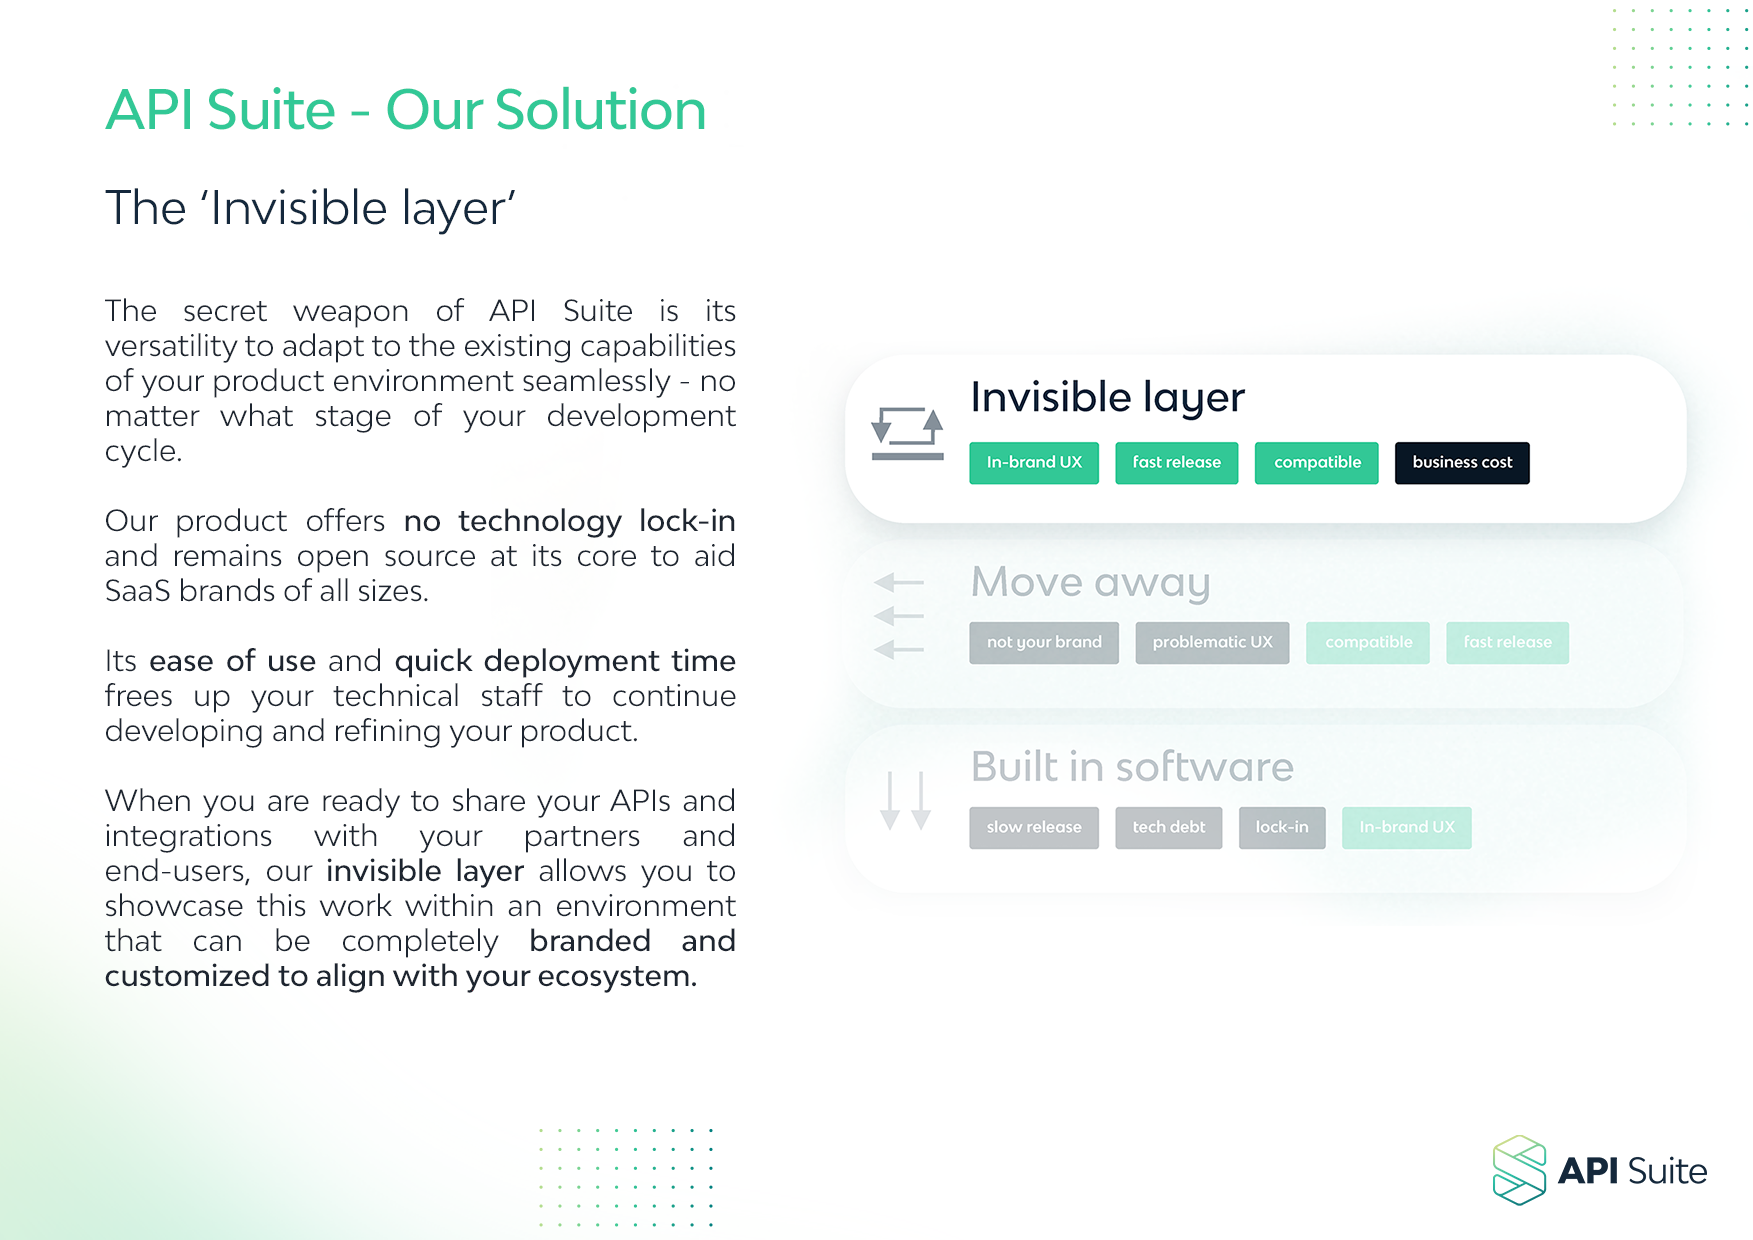 API Suite - Invisible layer solution